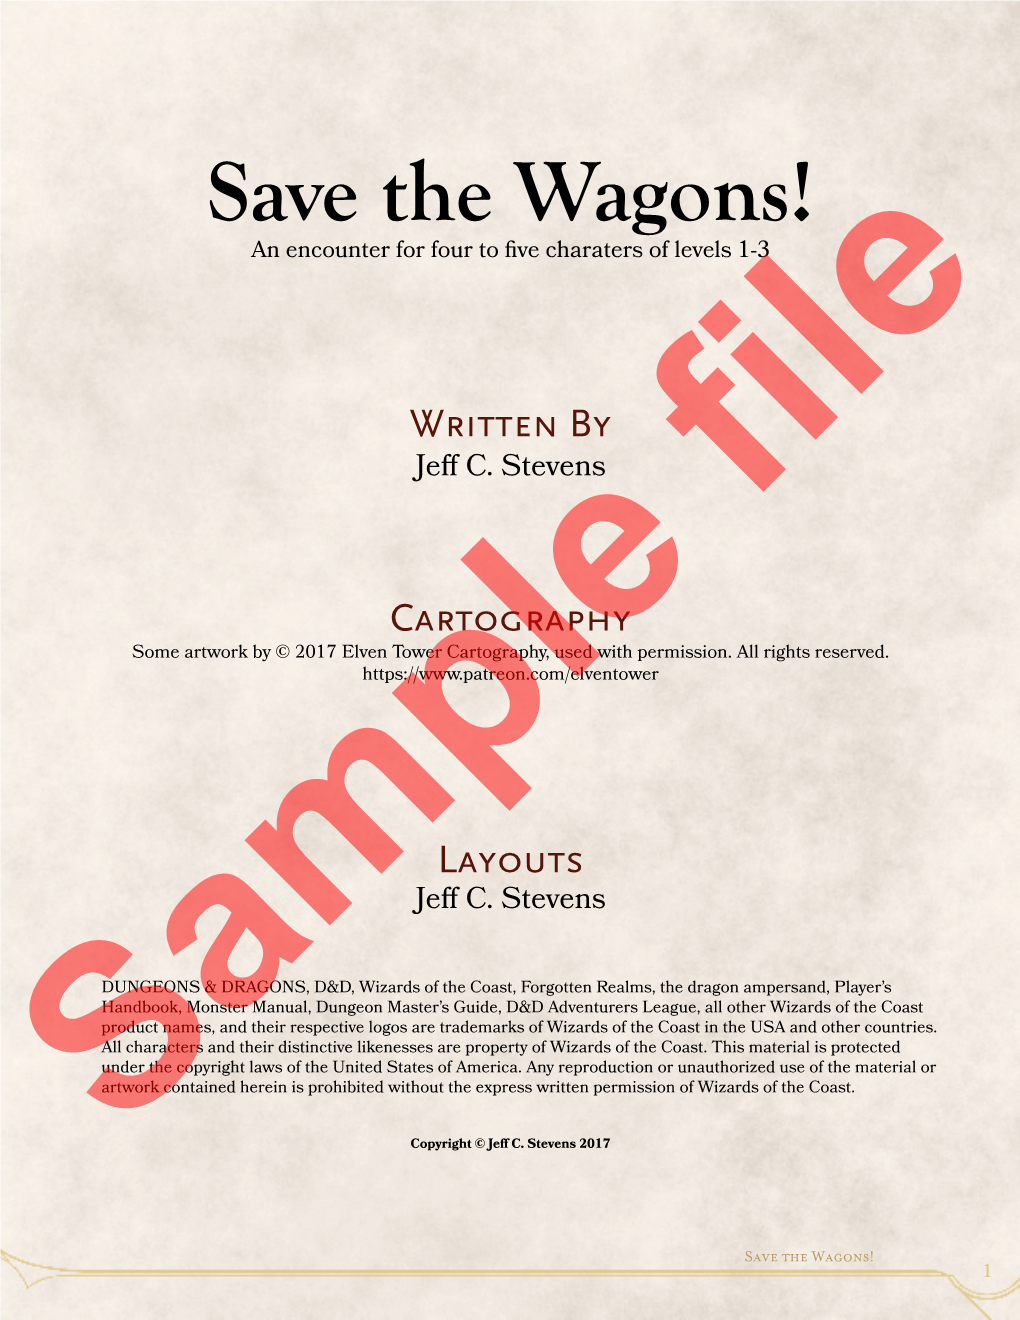 Save the Wagons! an Encounter for Four to Five Charaters of Levels 1-3